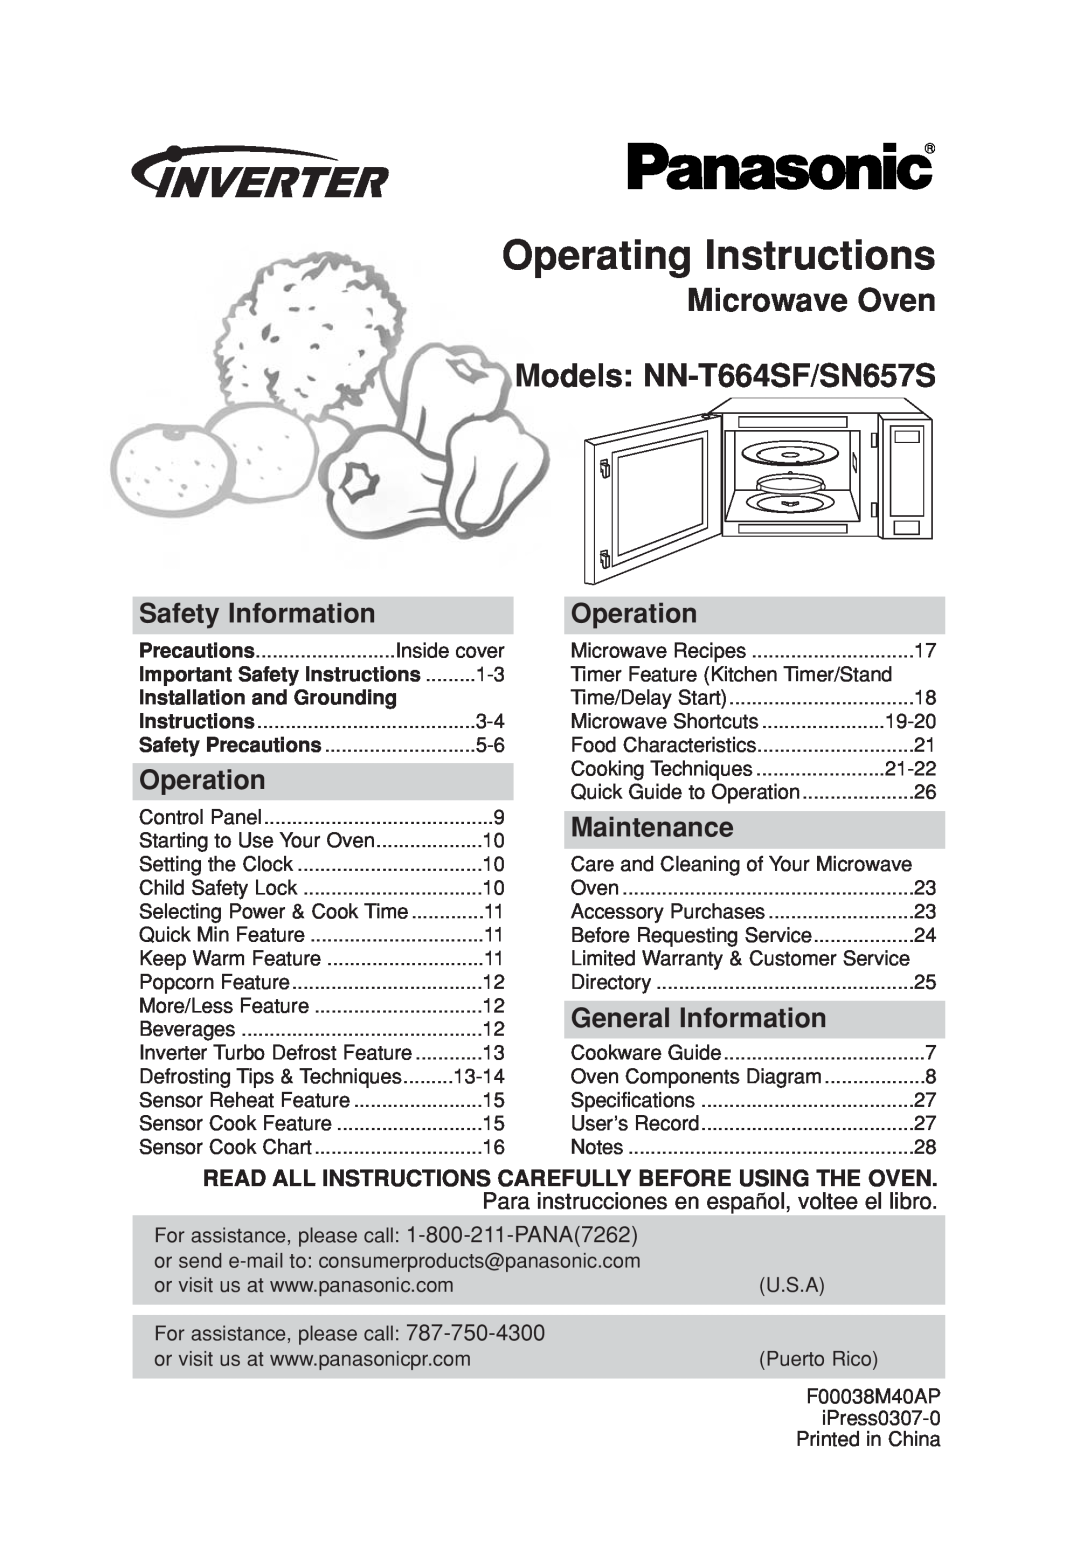 Panasonic operating instructions Operating Instructions, Microwave Oven Models NN-T664SF/SN657S, Safety Information 